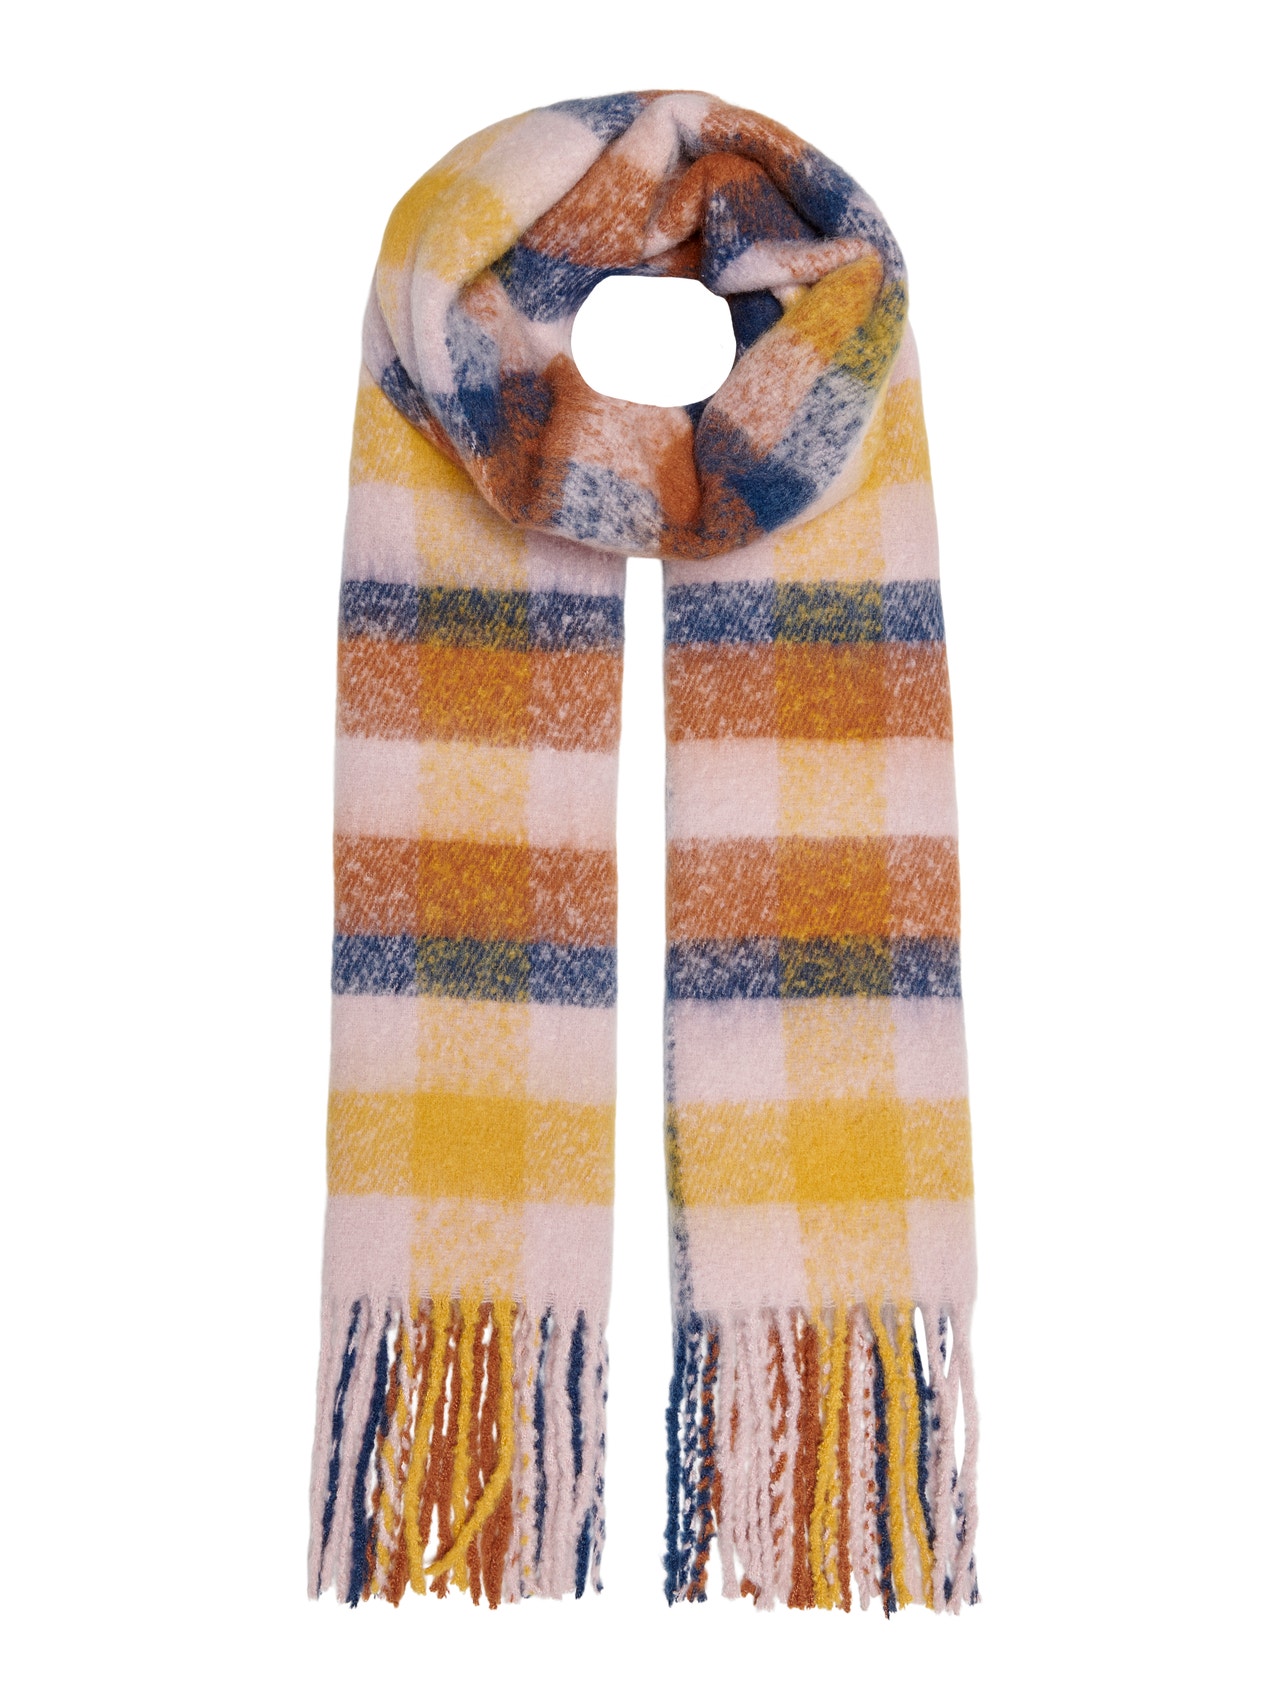 20% ONLY® | with discount! Scarf